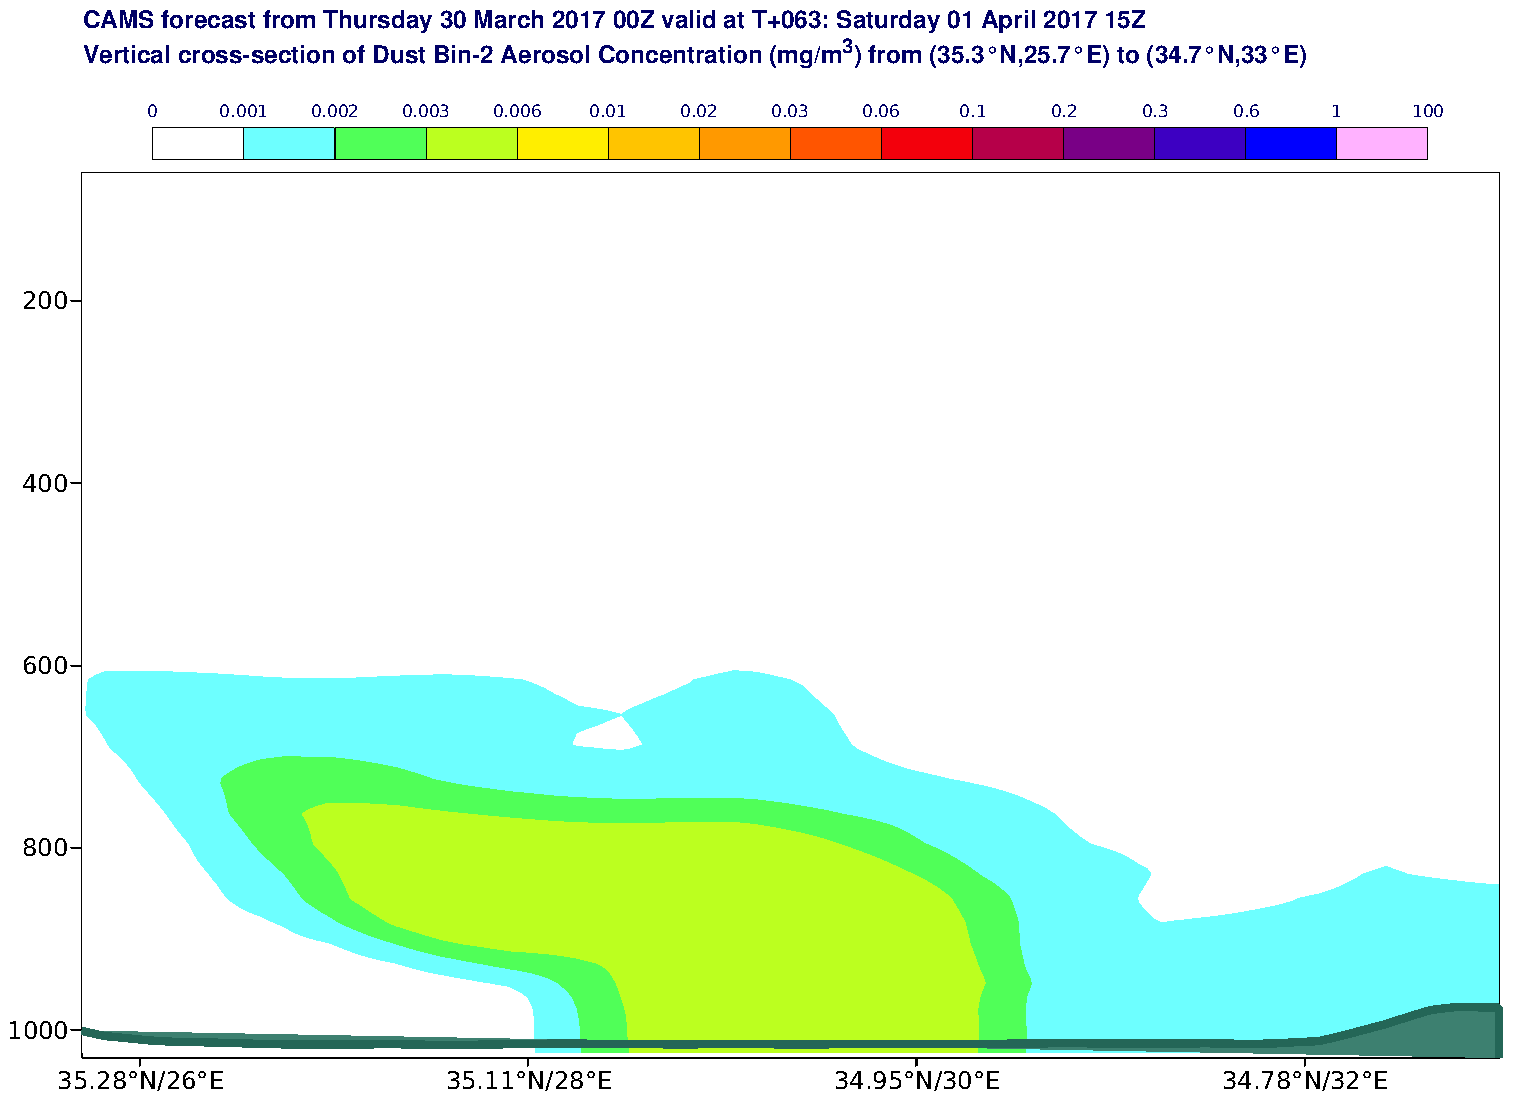 Vertical cross-section of Dust Bin-2 Aerosol Concentration (mg/m3) valid at T63 - 2017-04-01 15:00